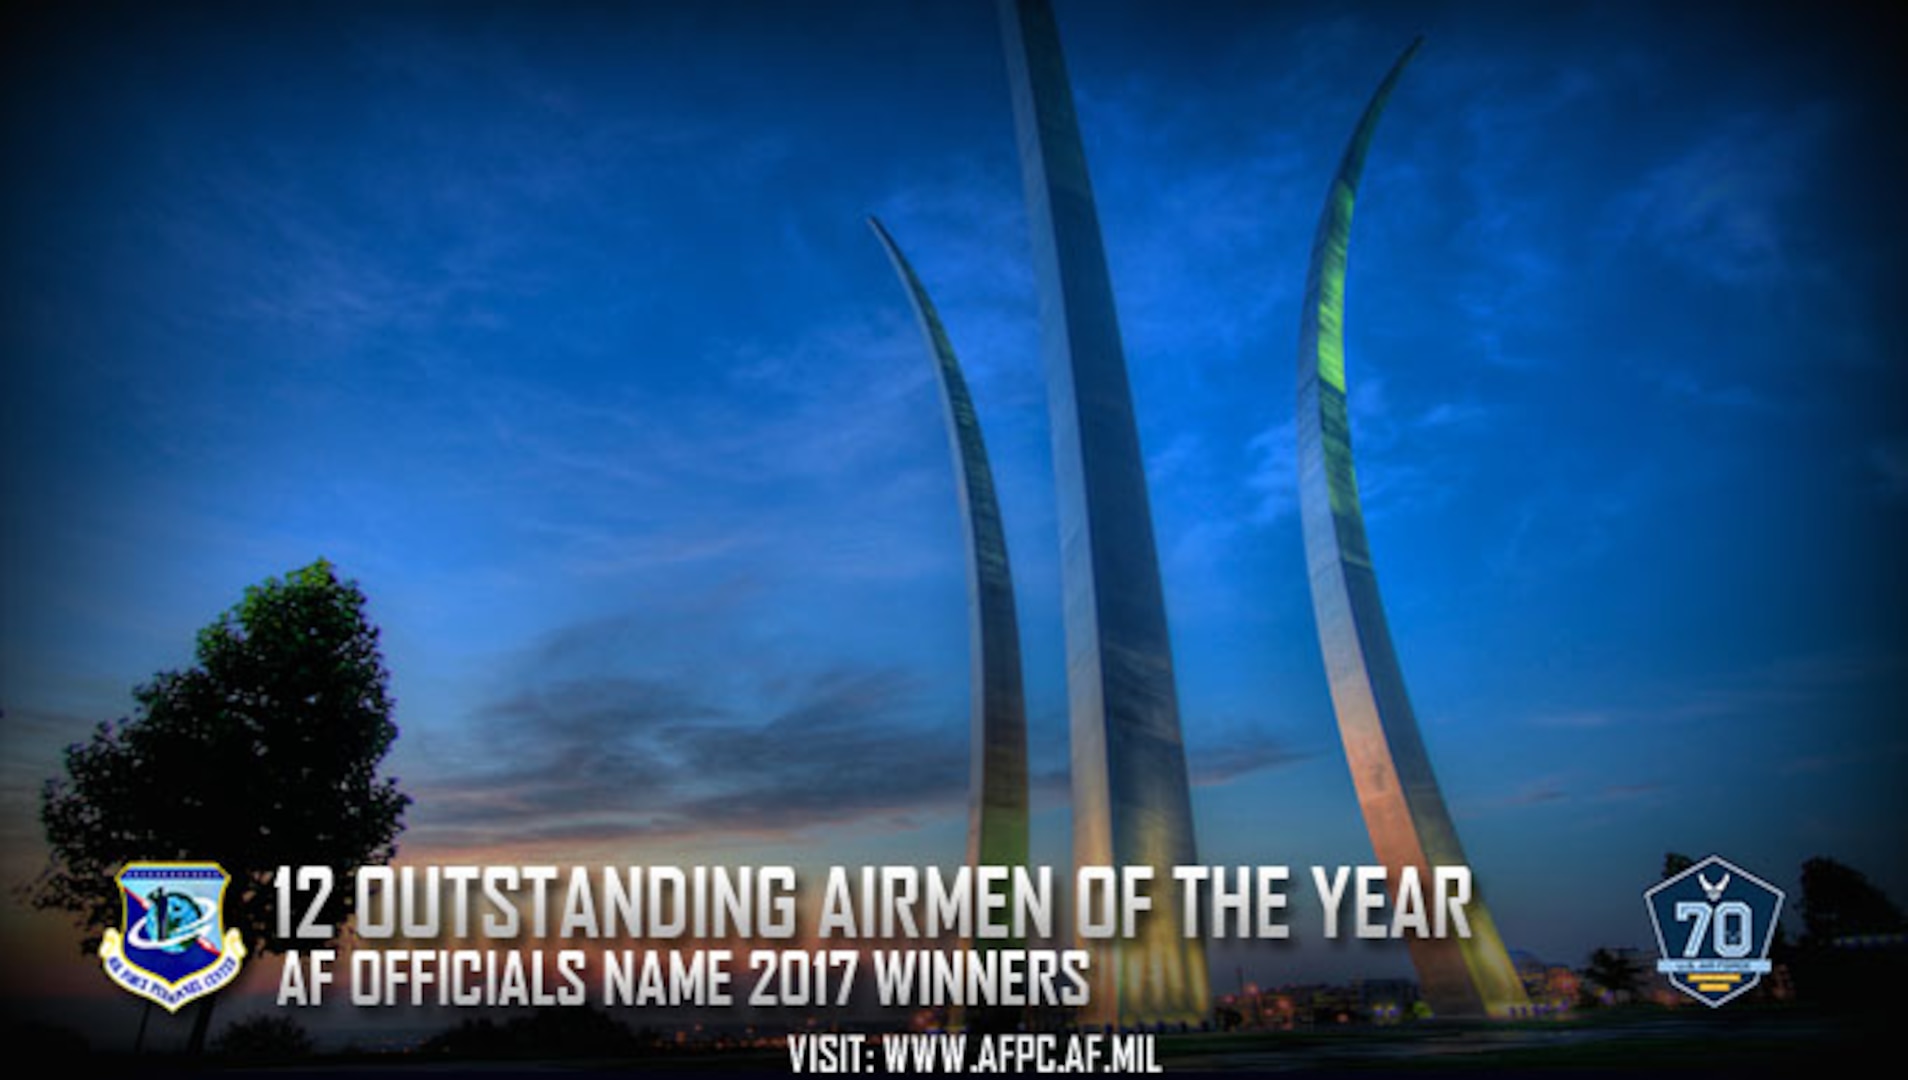 Officials announce 12 OAY Award winners for 2017 > Joint Base San